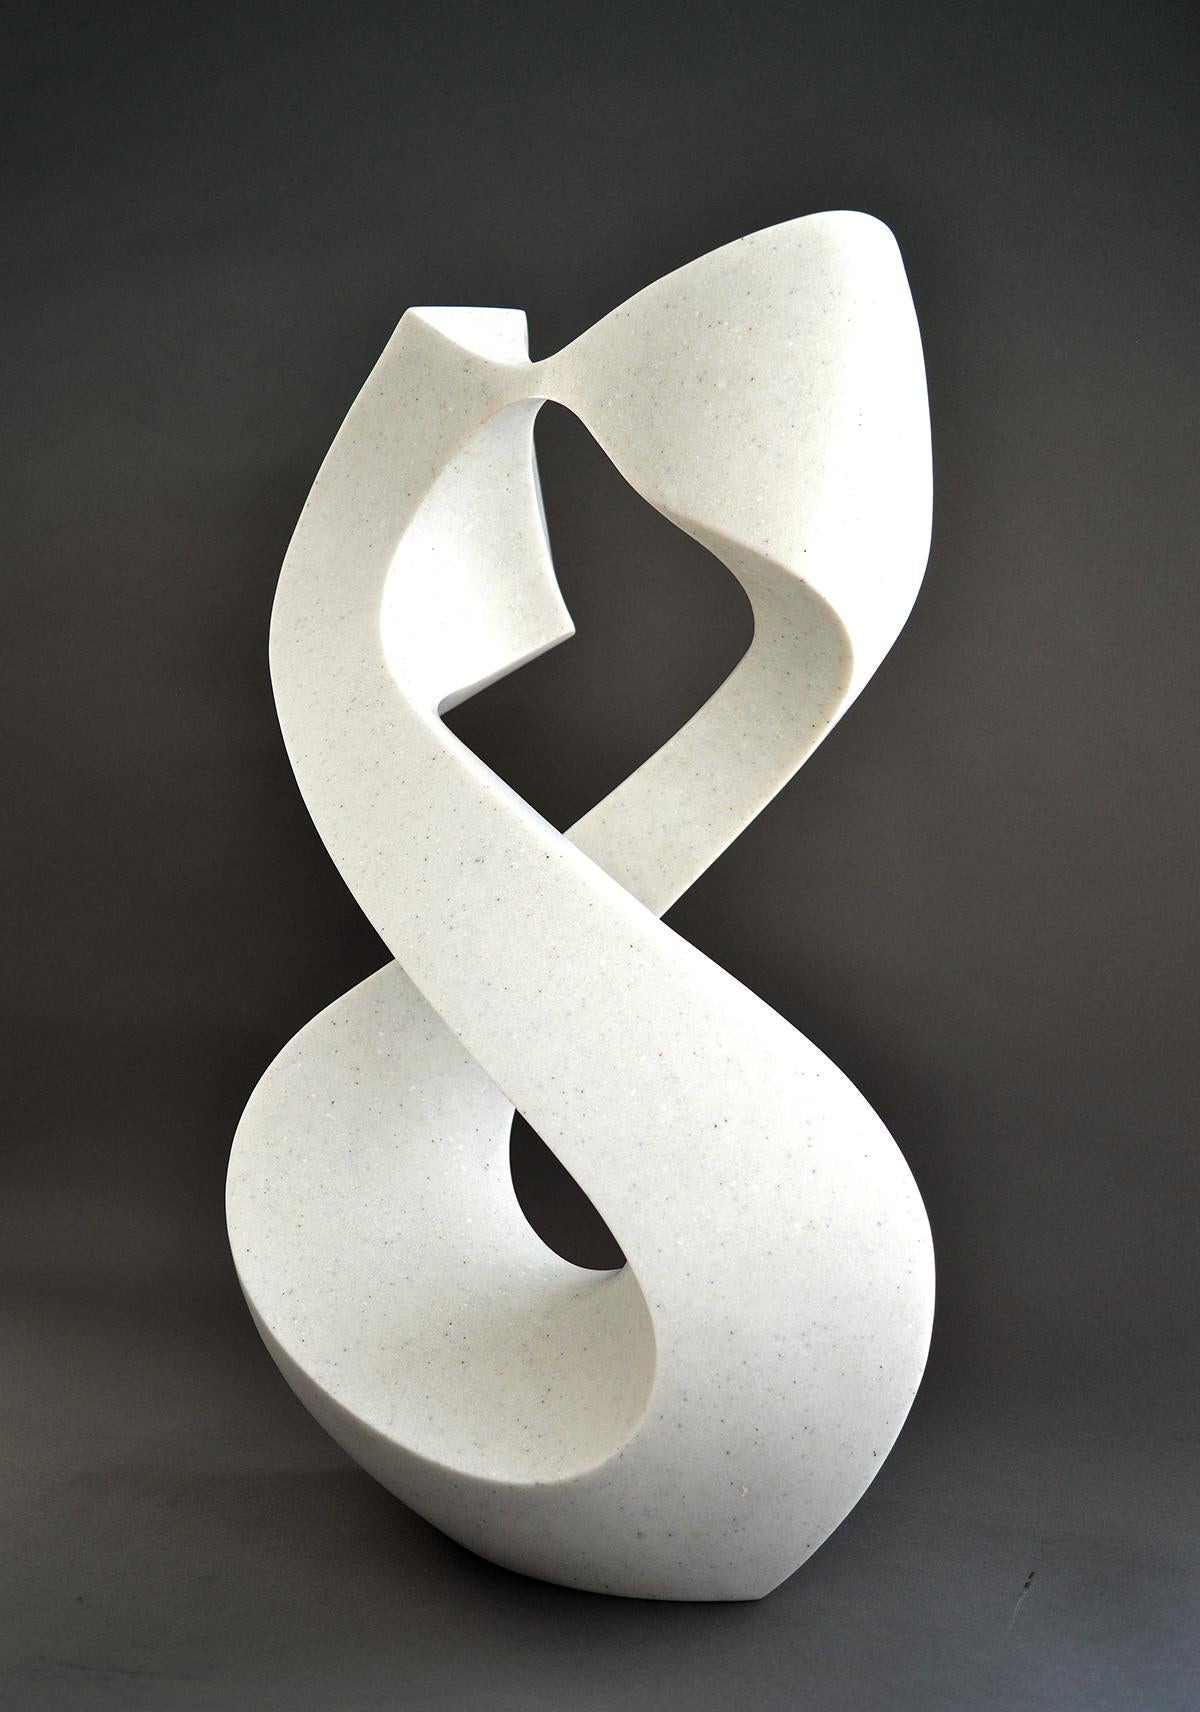 Halcyon White 4/50 - smooth, polished, abstract, engineered stone sculpture - Contemporary Sculpture by Jeremy Guy